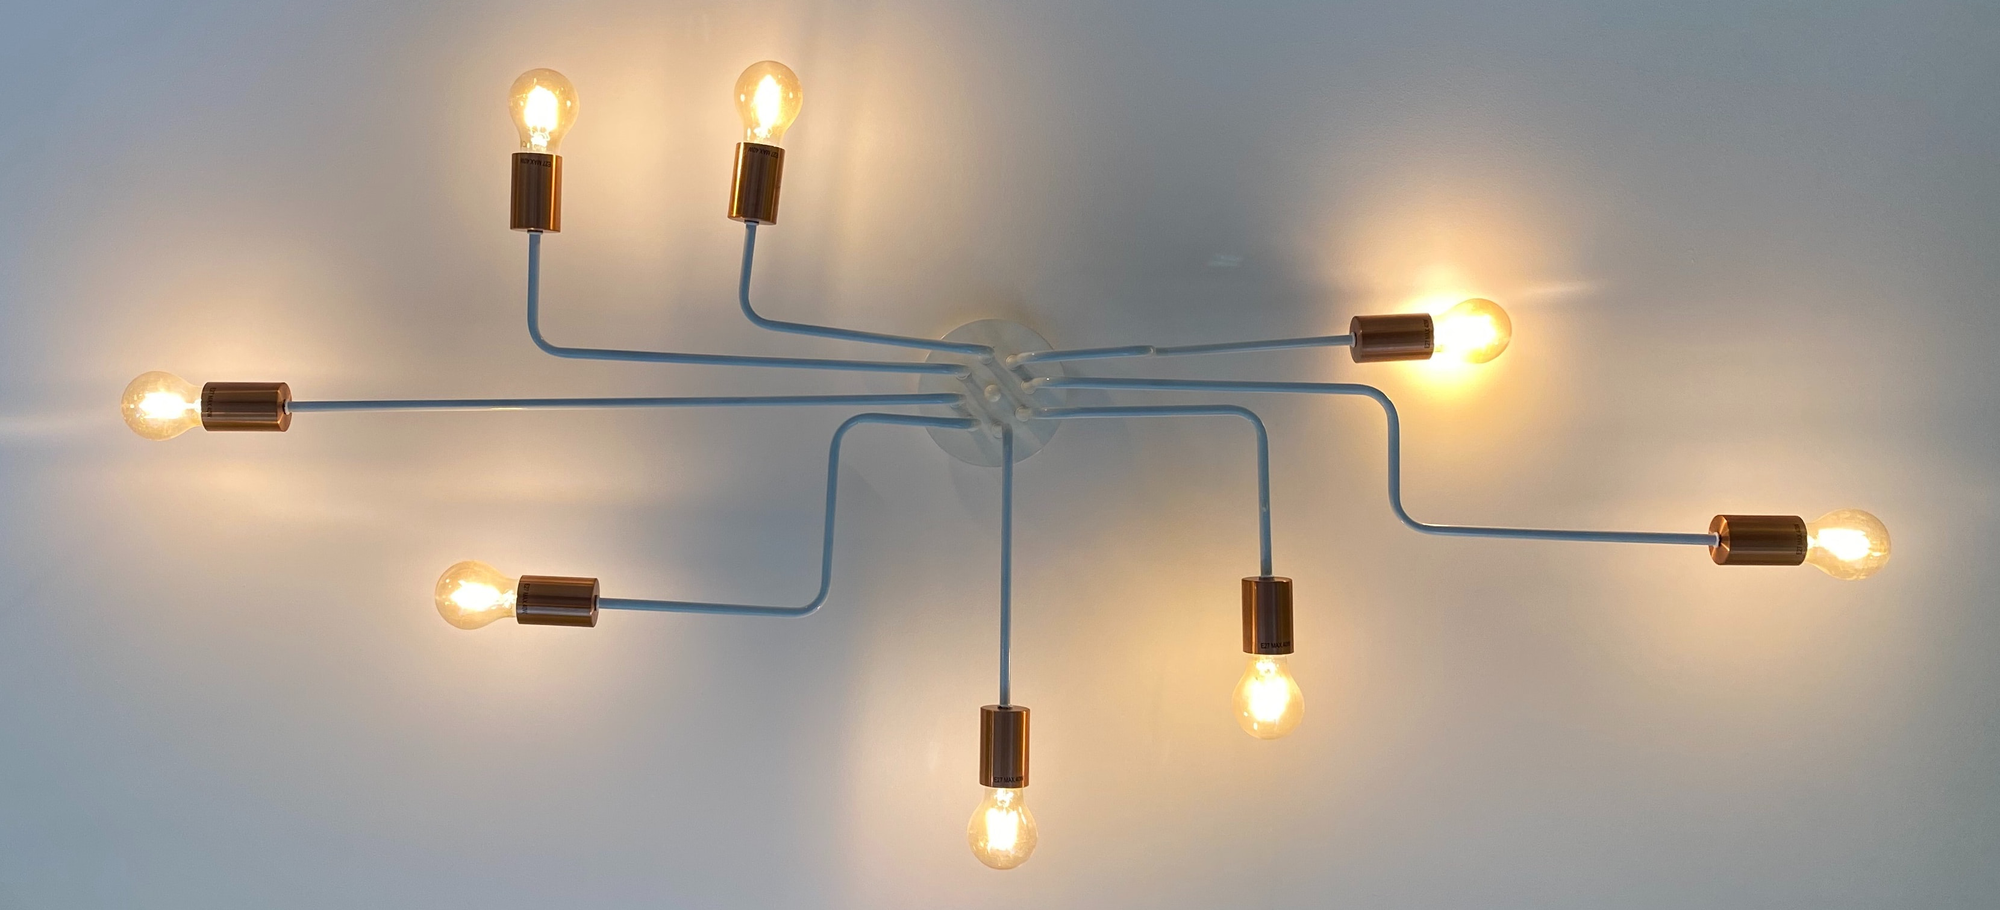 an image of lightbulbs connecting to a central purpose to show a brands ability to relate to customers